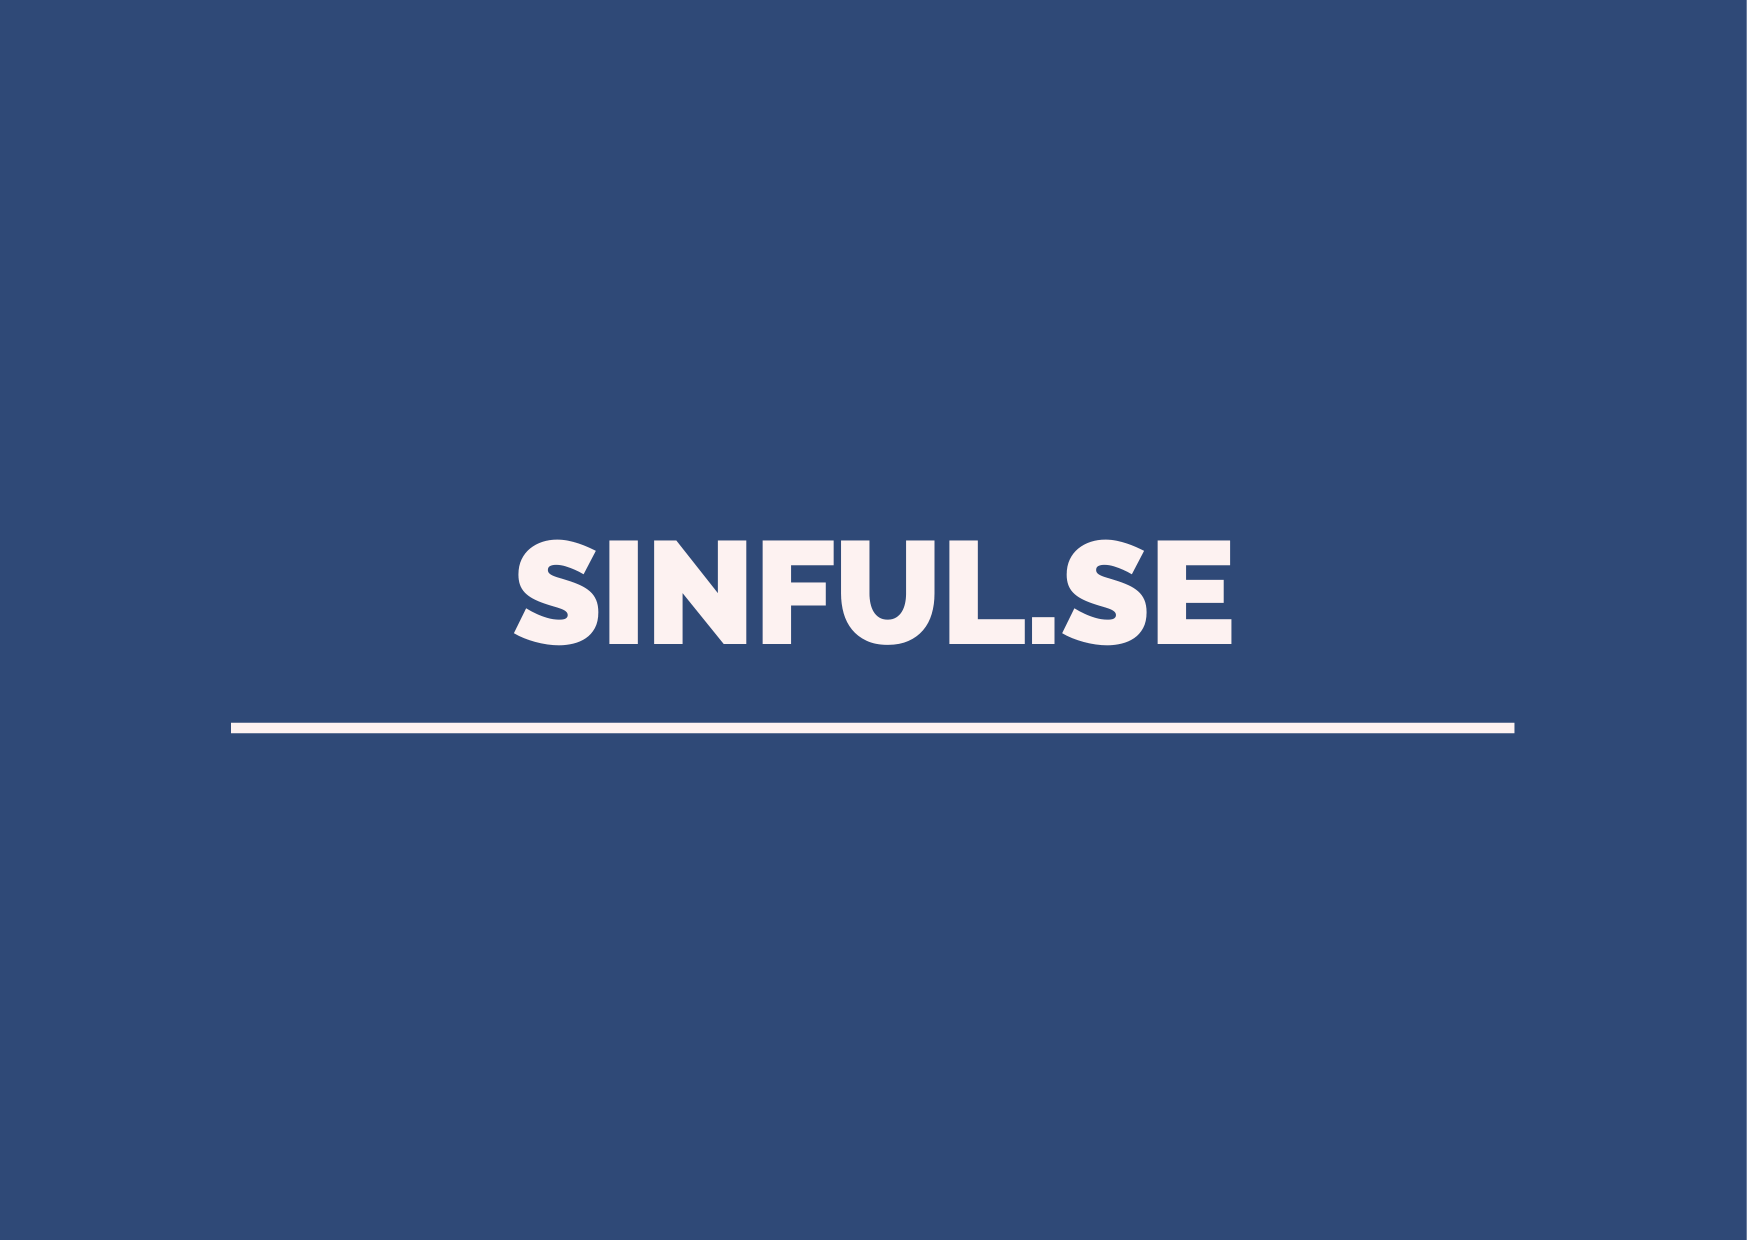 sinful.se text